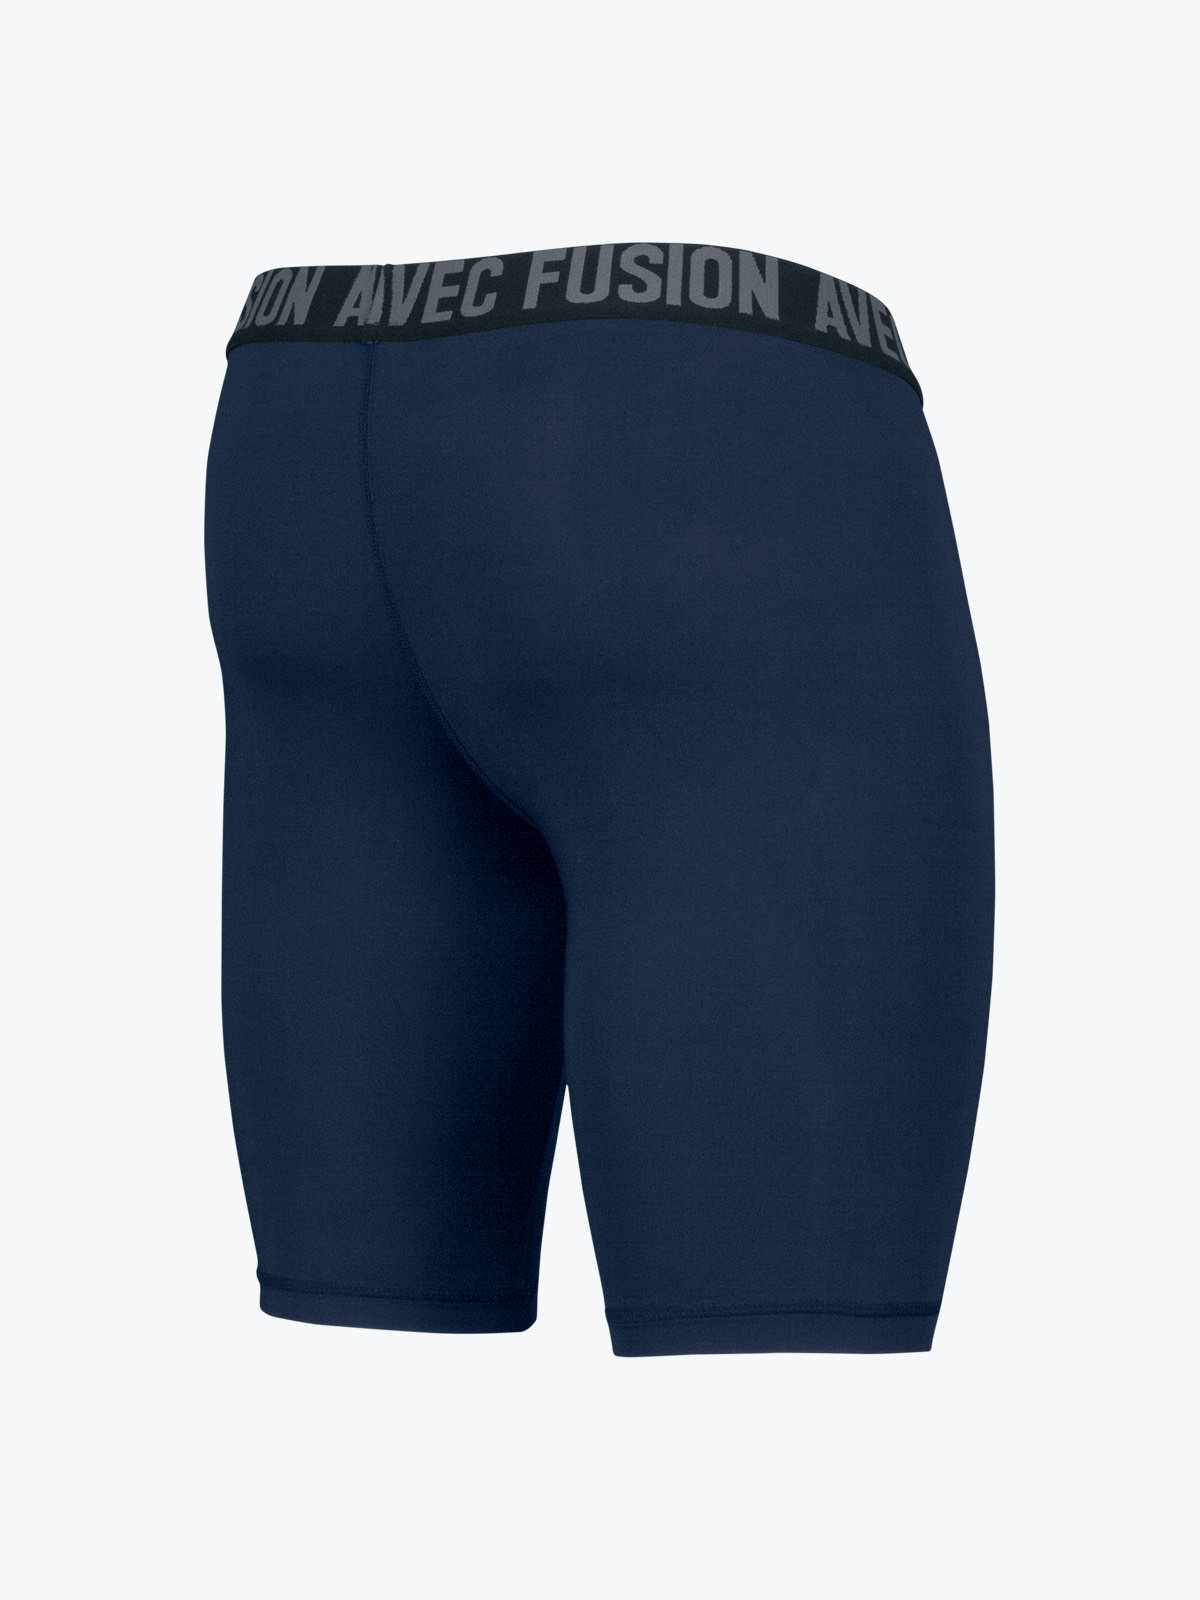 picture of fusion body fit short - navy